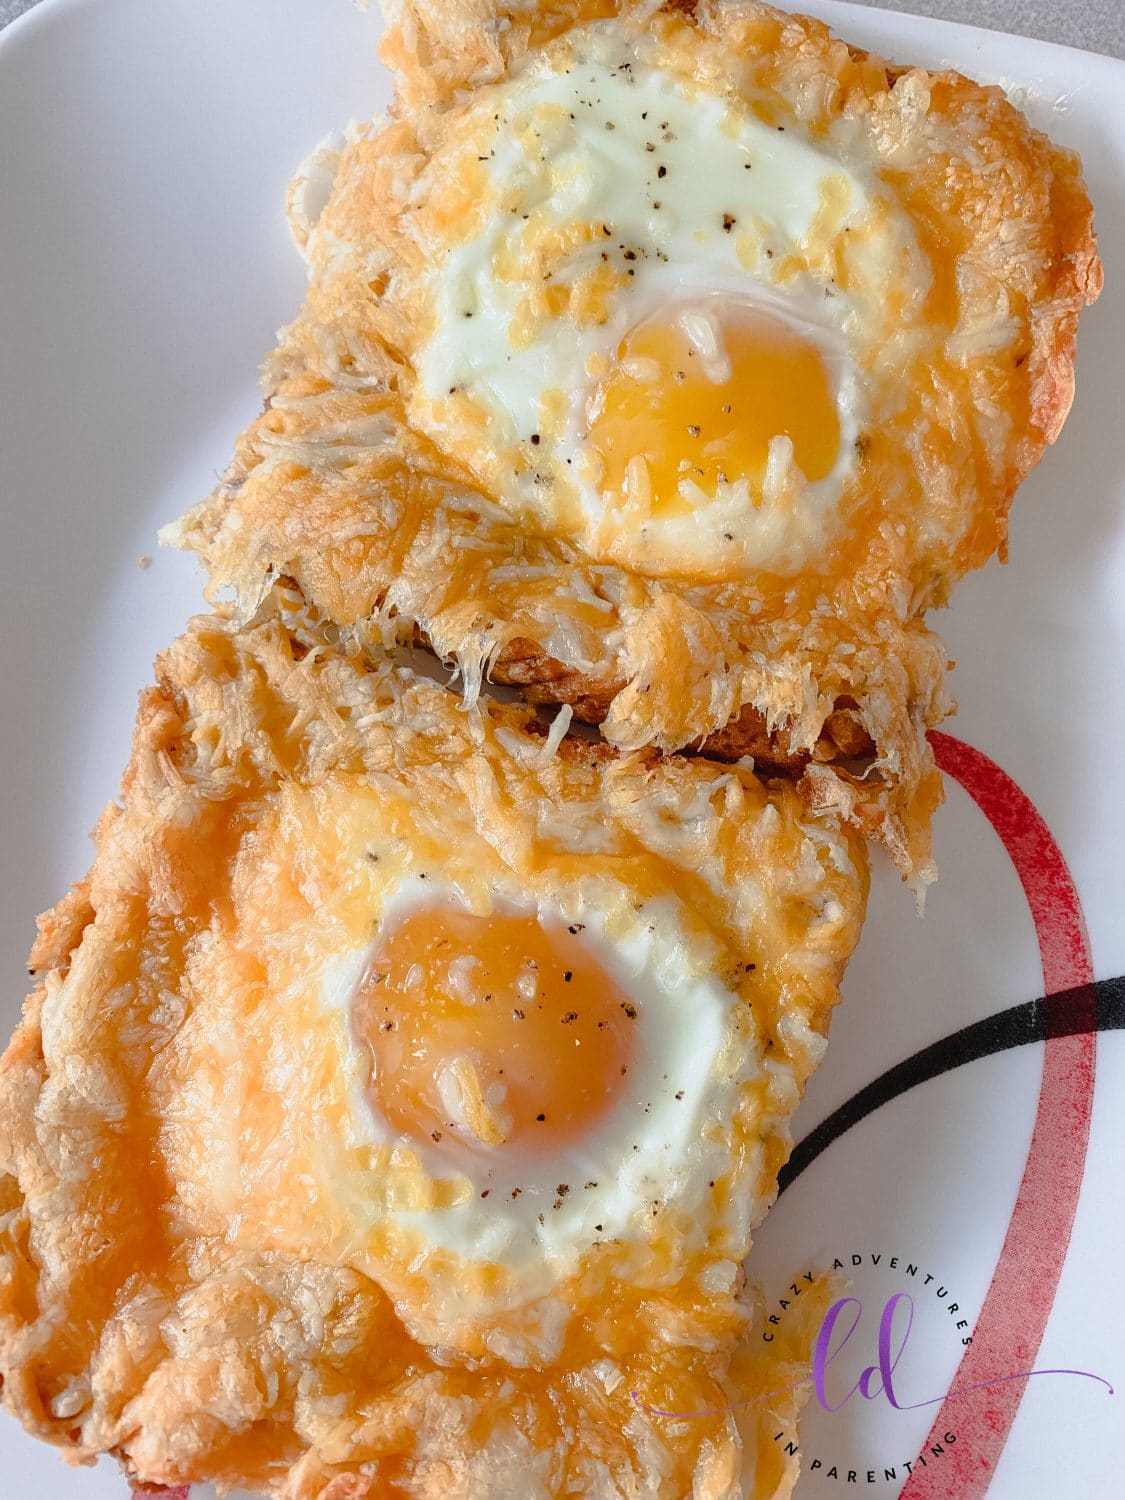 Plate of Sheet Pan Cheesy Baked Egg Toast